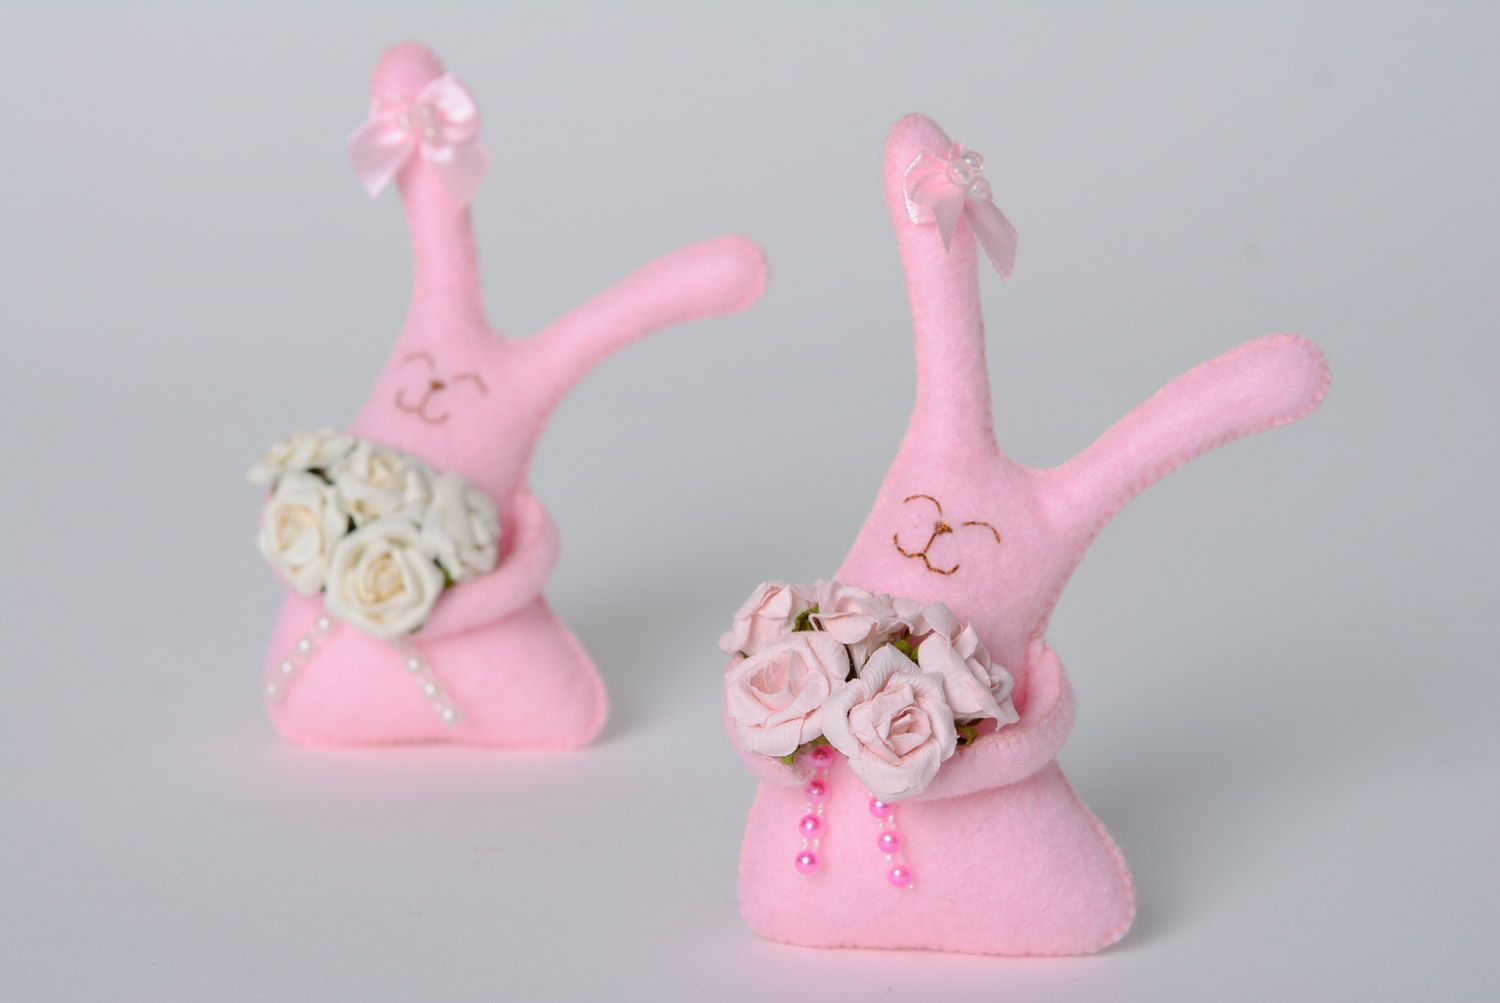 Handmade designer small soft toy bunnies in pink colors set of 2 pieces gift for baby photo 5